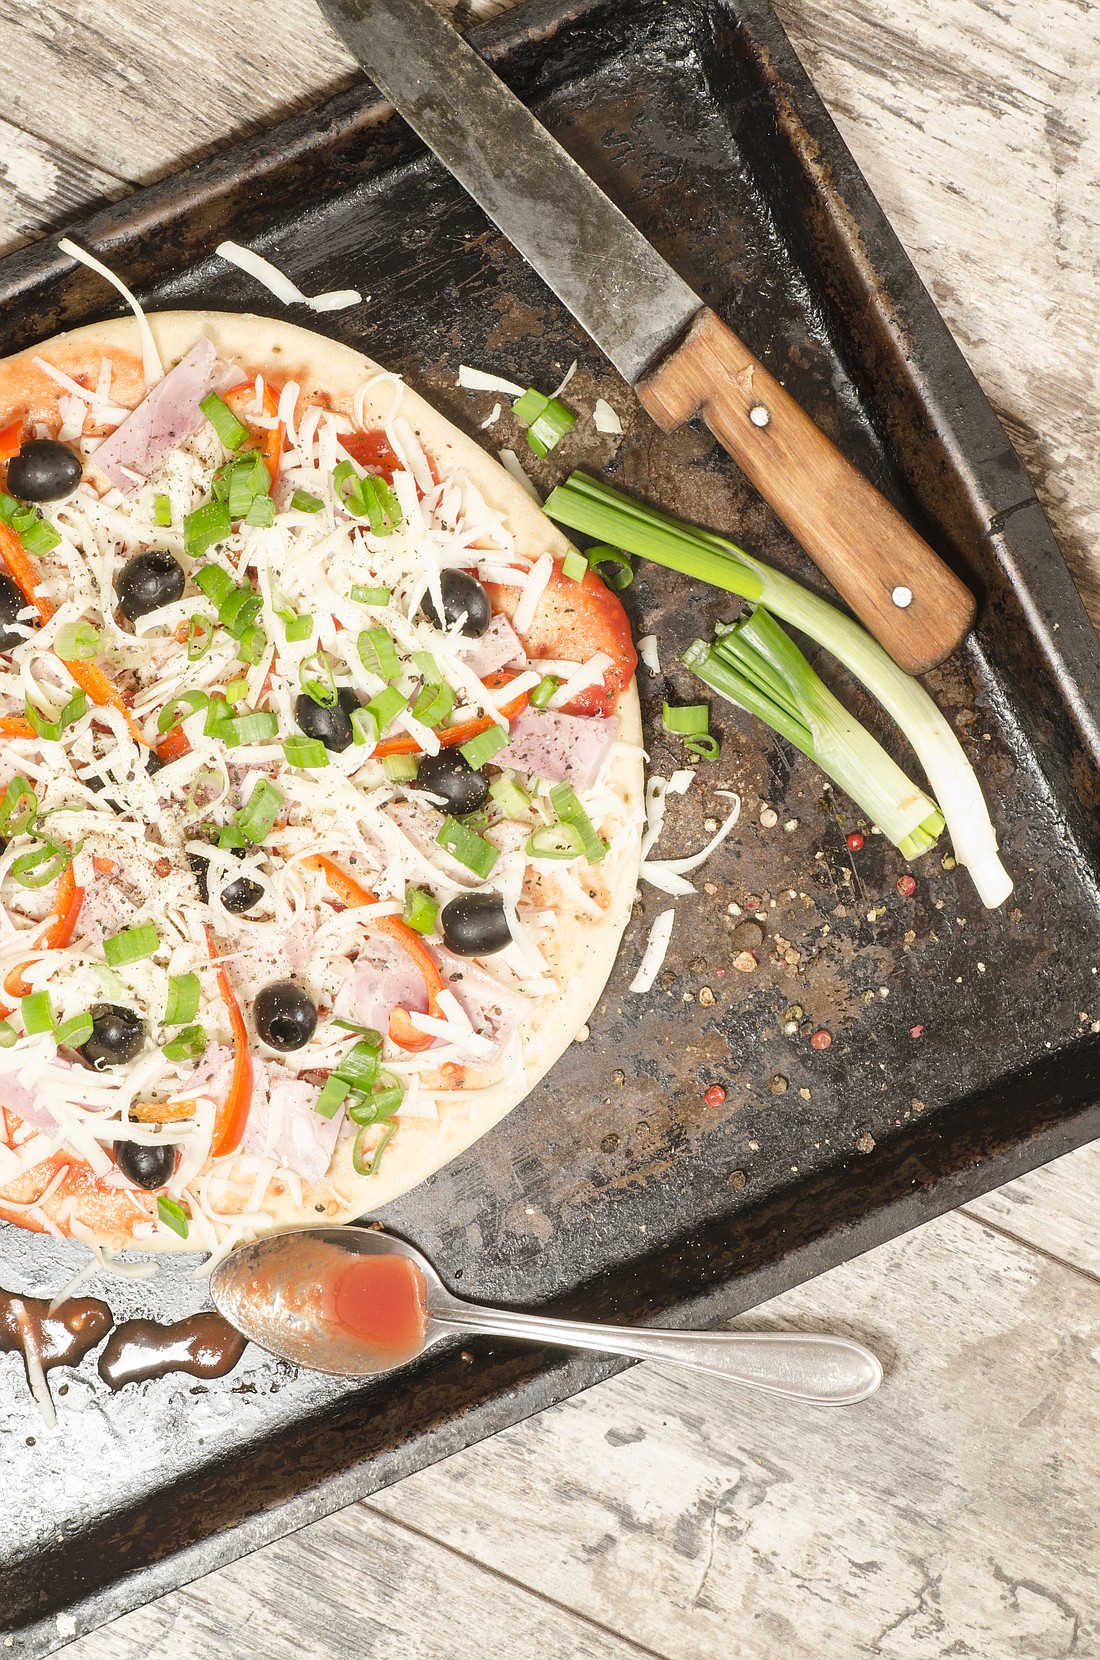 Making pizza from scratch at home is not only easy, but it's heart- and kidney-healthy as well.